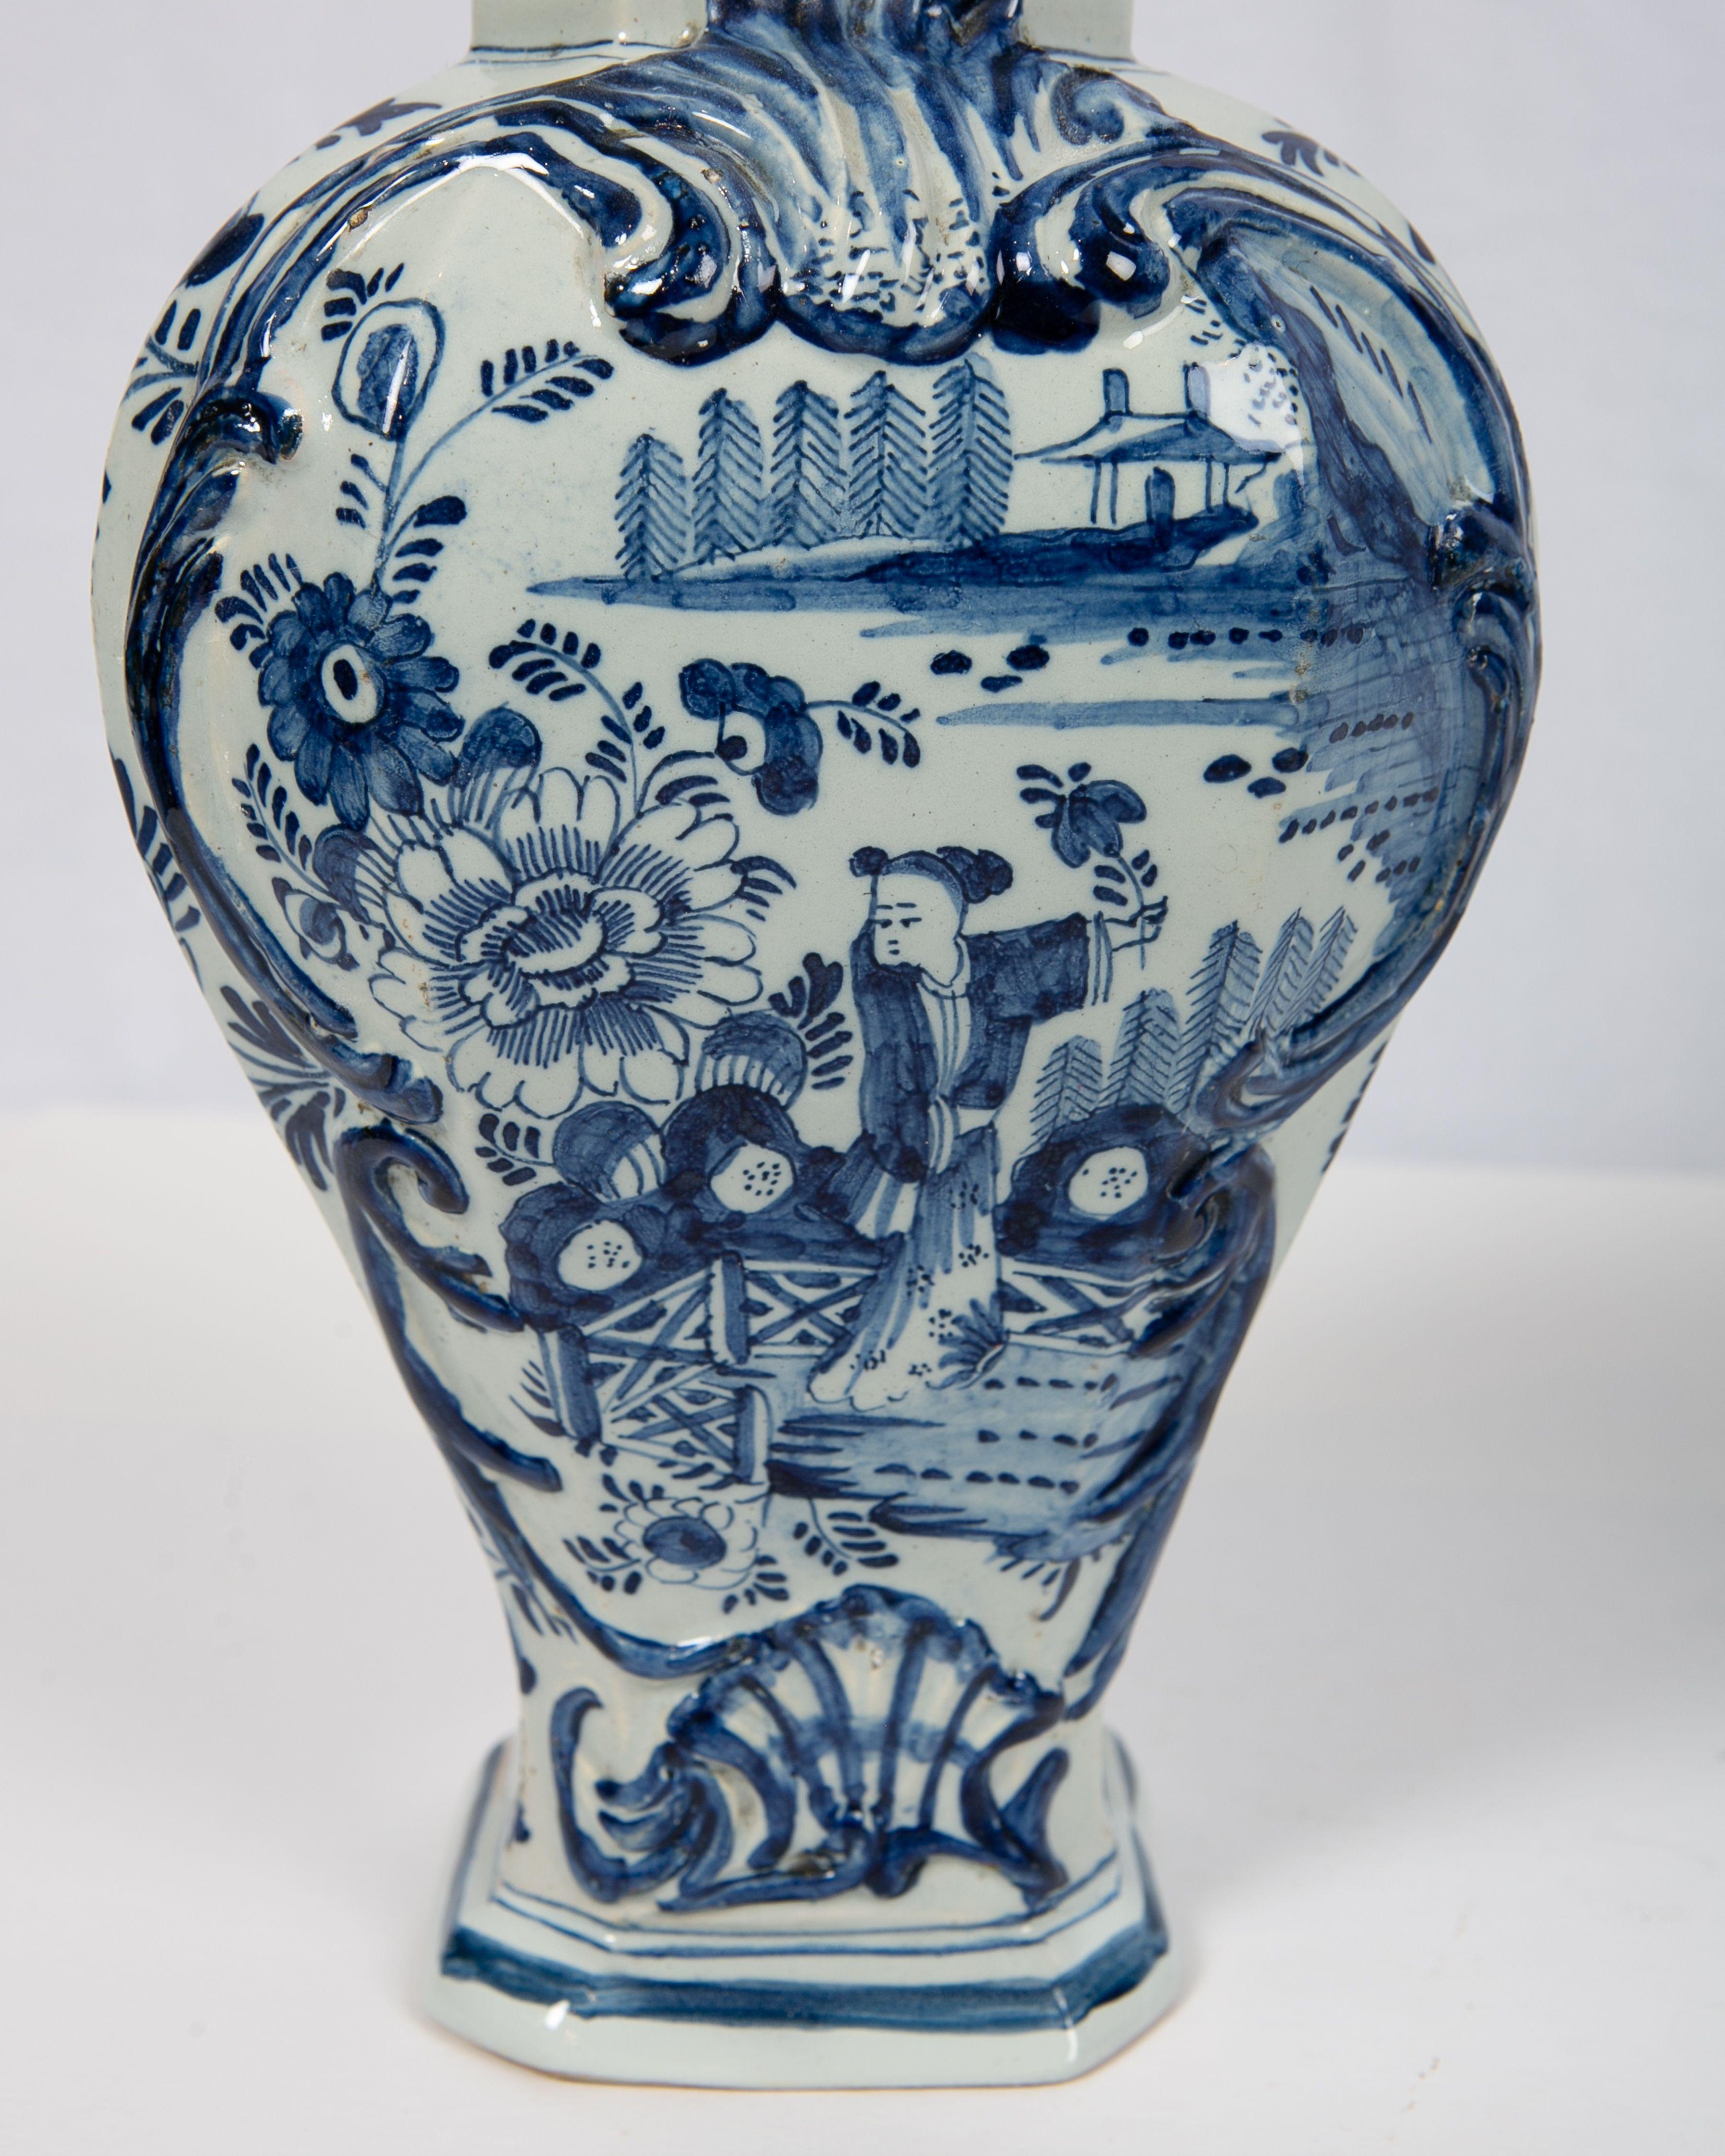 A pair of 18th-century blue and white Delft covered mantle vases hand-painted in shades of cobalt blue. The romantic chinoiserie design shows a young lady picking flowers in a garden. Around her, we see the garden fence, oversized flowers, and